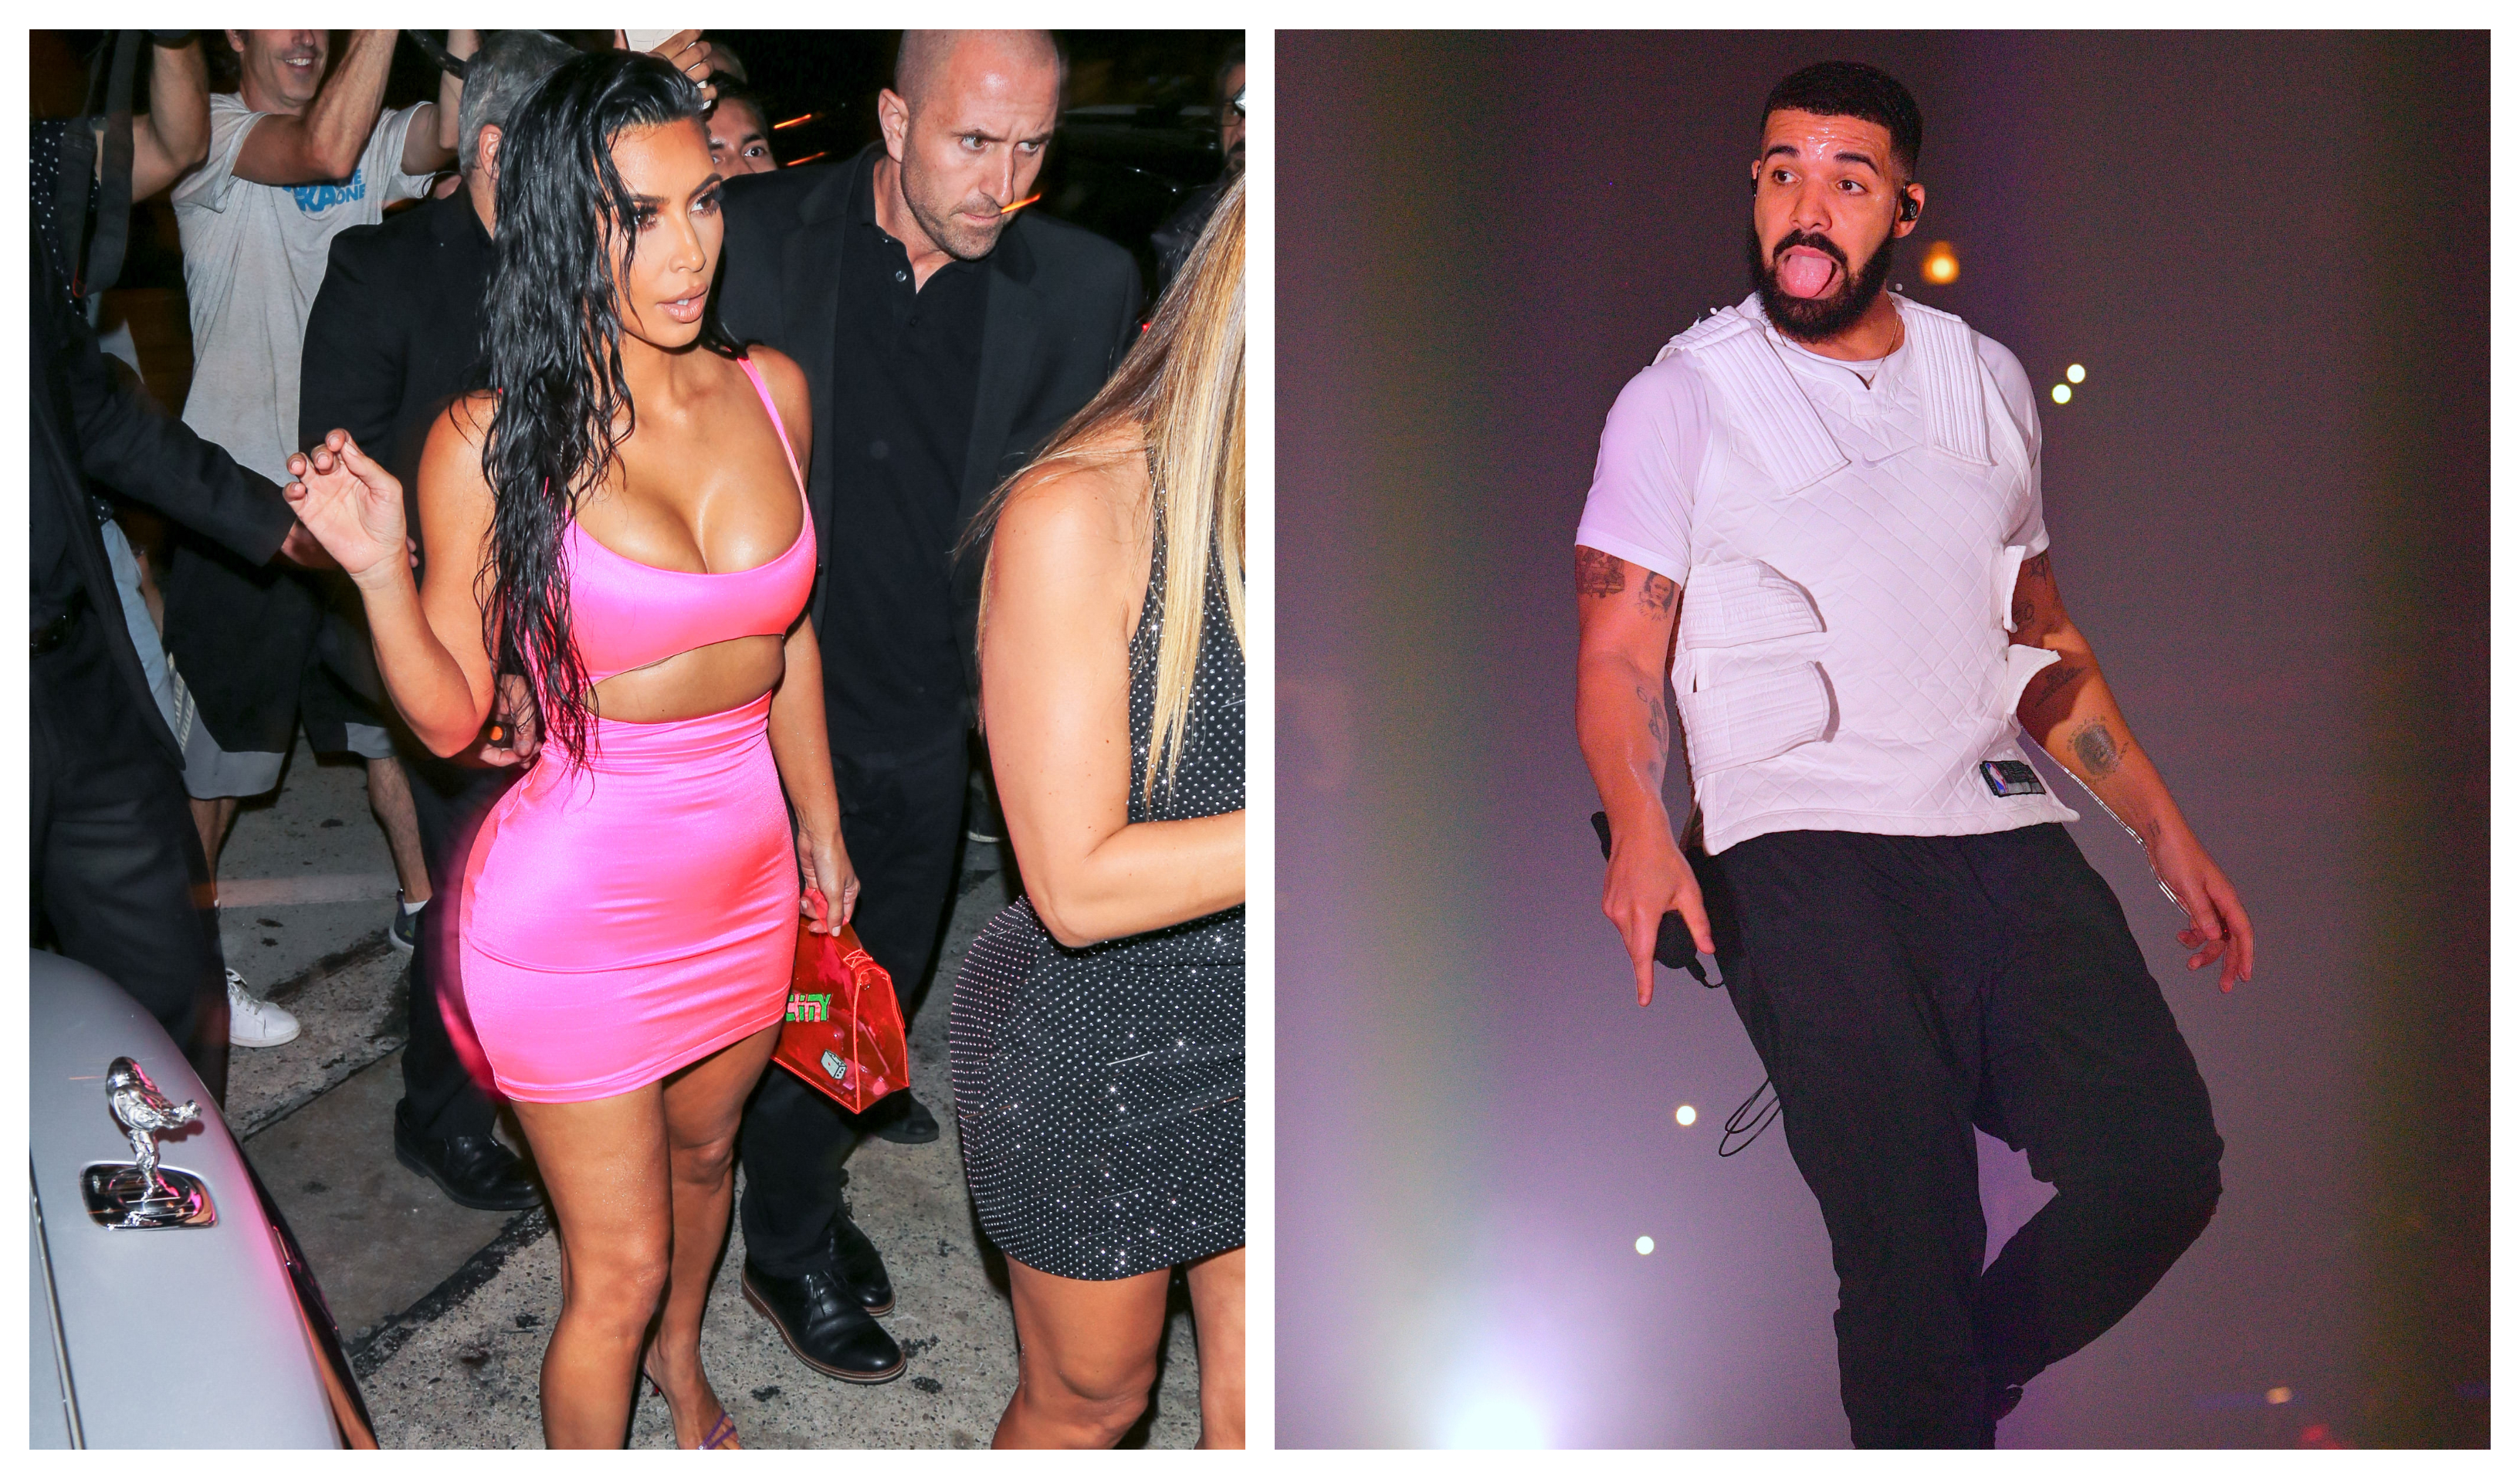 drake seemingly addresses the rumors that he slept with kim kardashian in the sneakiest way ever - who does drake fol!   low on instagram